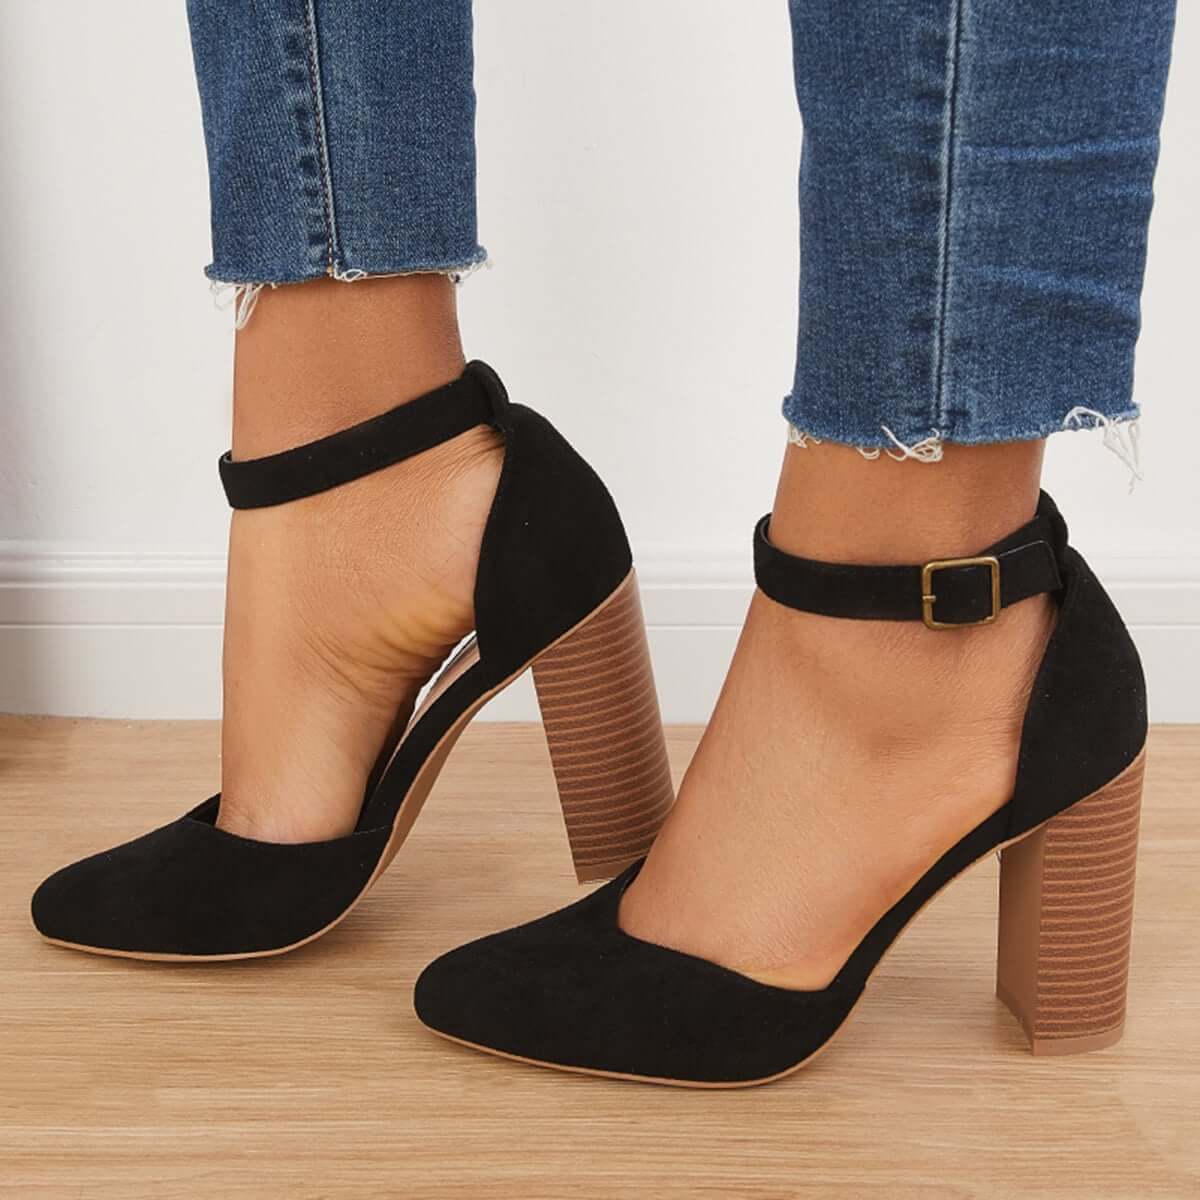 Veooy Casual Chunky Block High Heel Pumps Pointed Toe Ankle Strap Heels